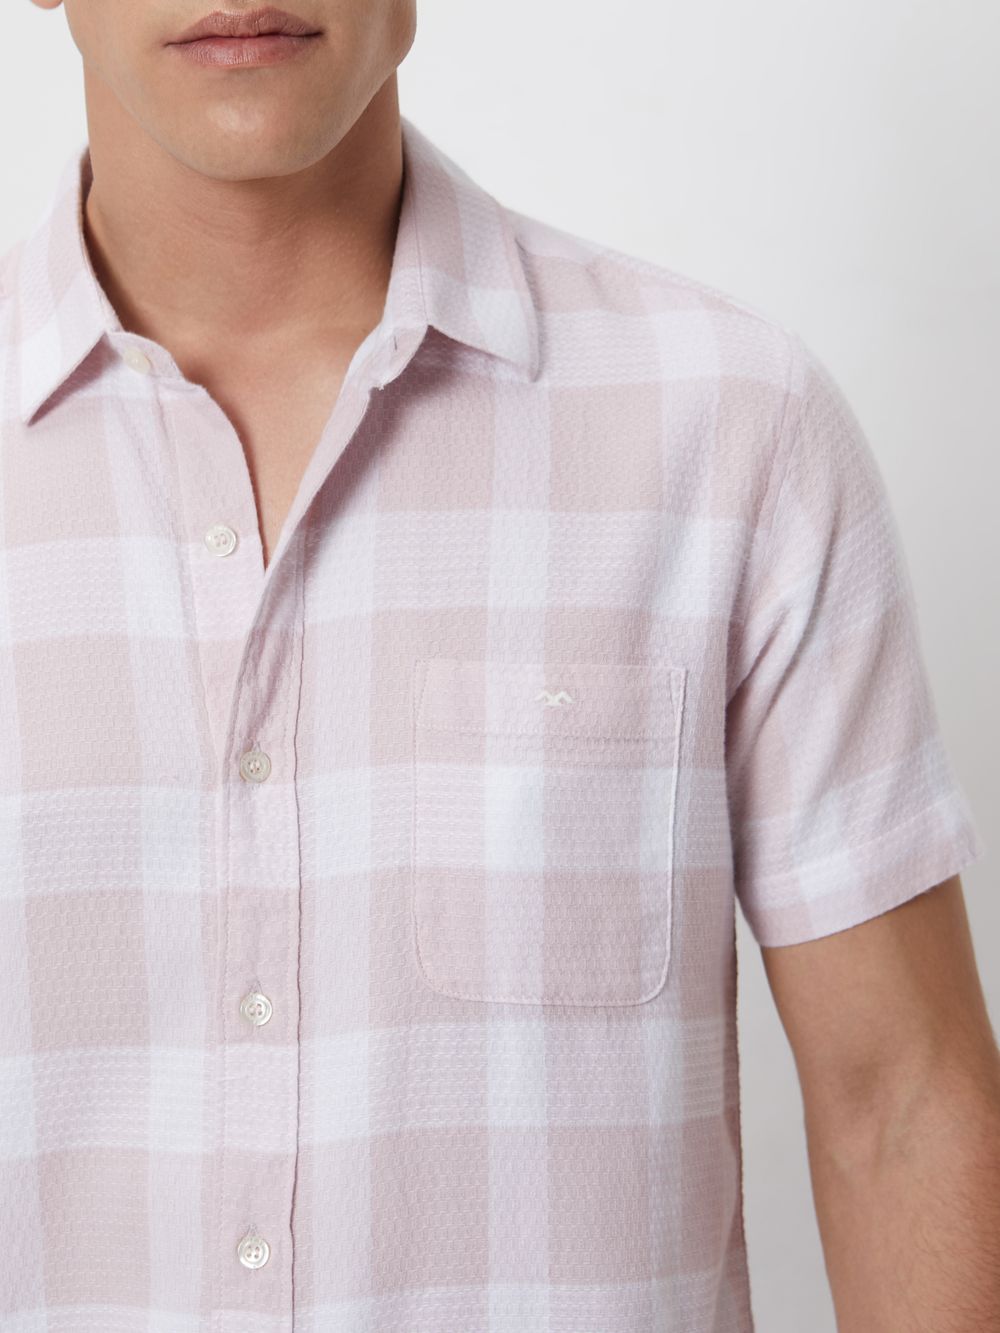 Pink & White Textured Check Slim Fit Casual Shirt